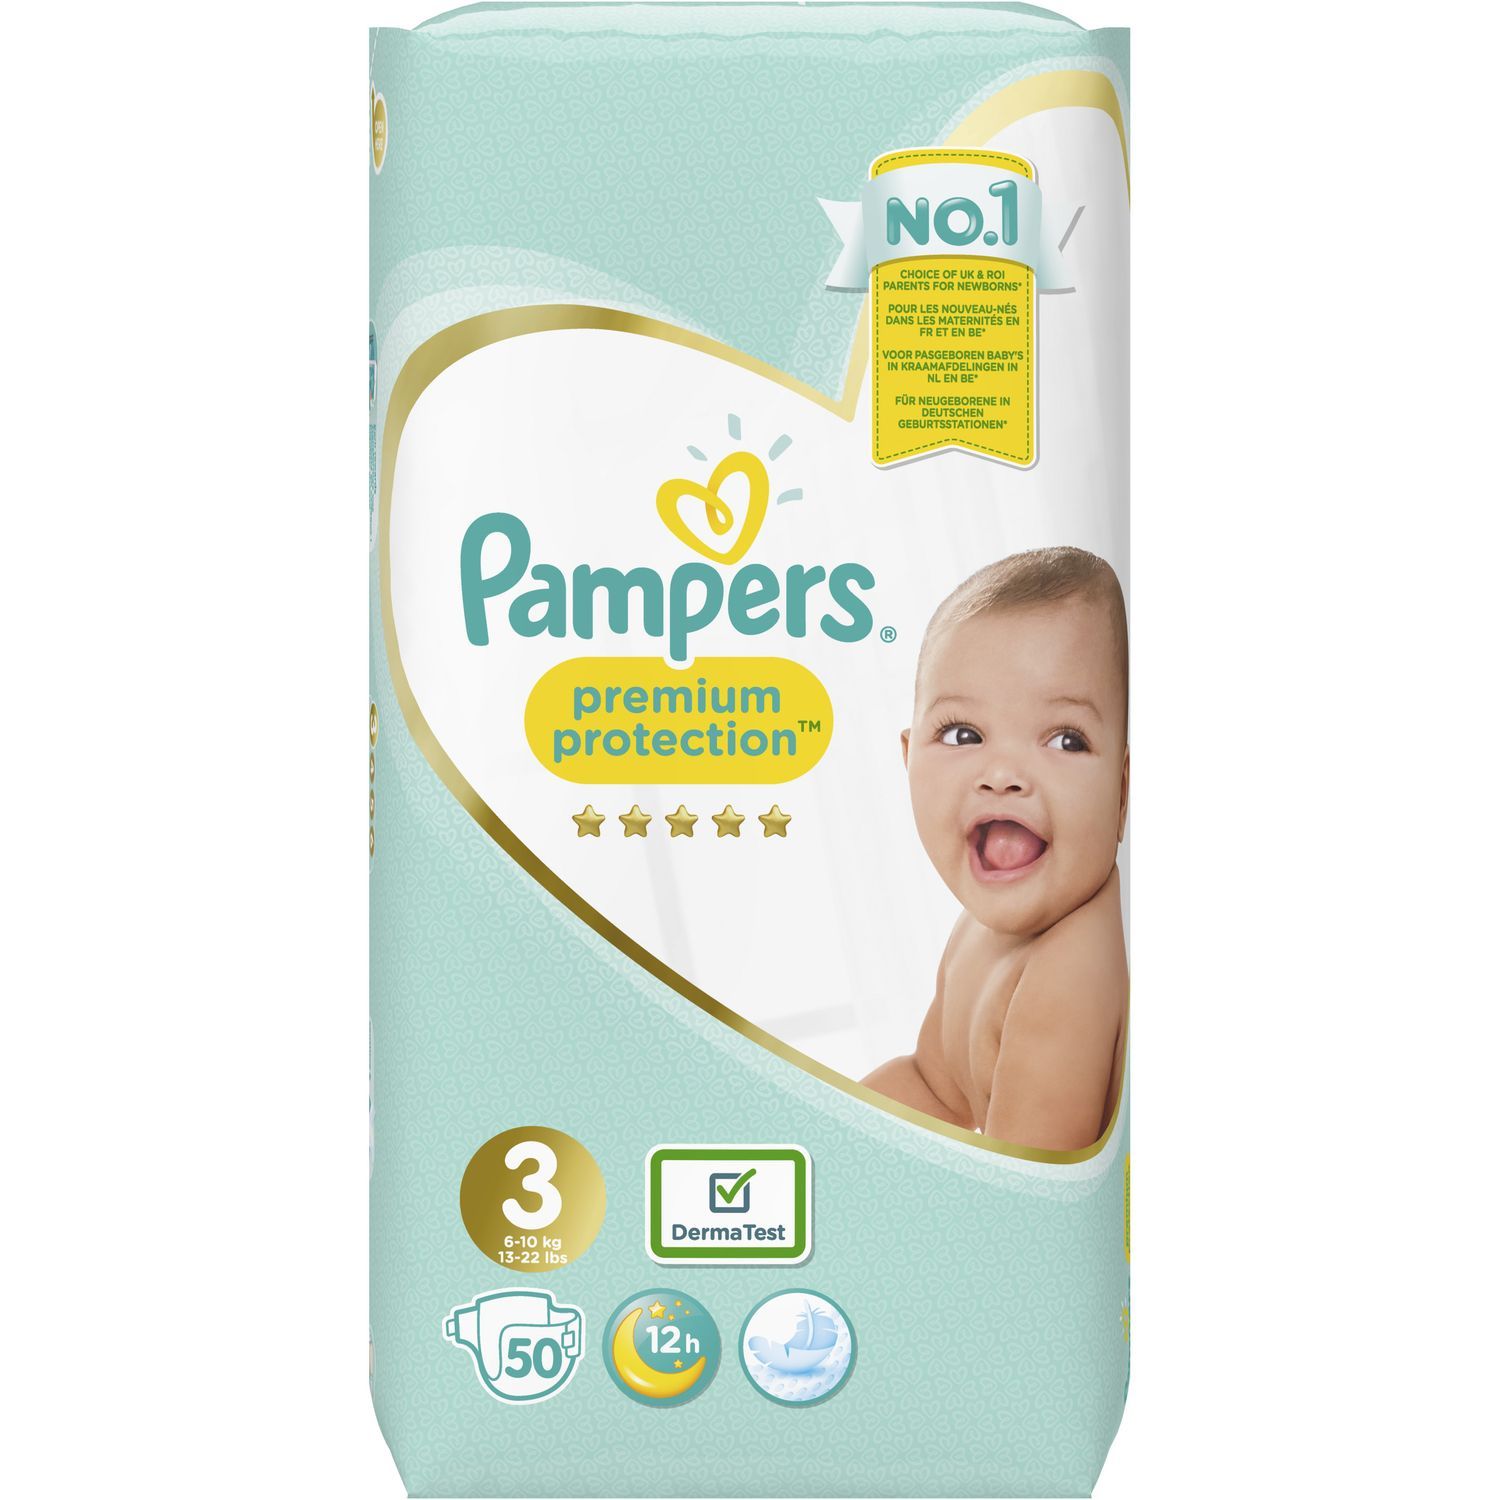 Pampers - Couches taille 3 - Supermarchés Match